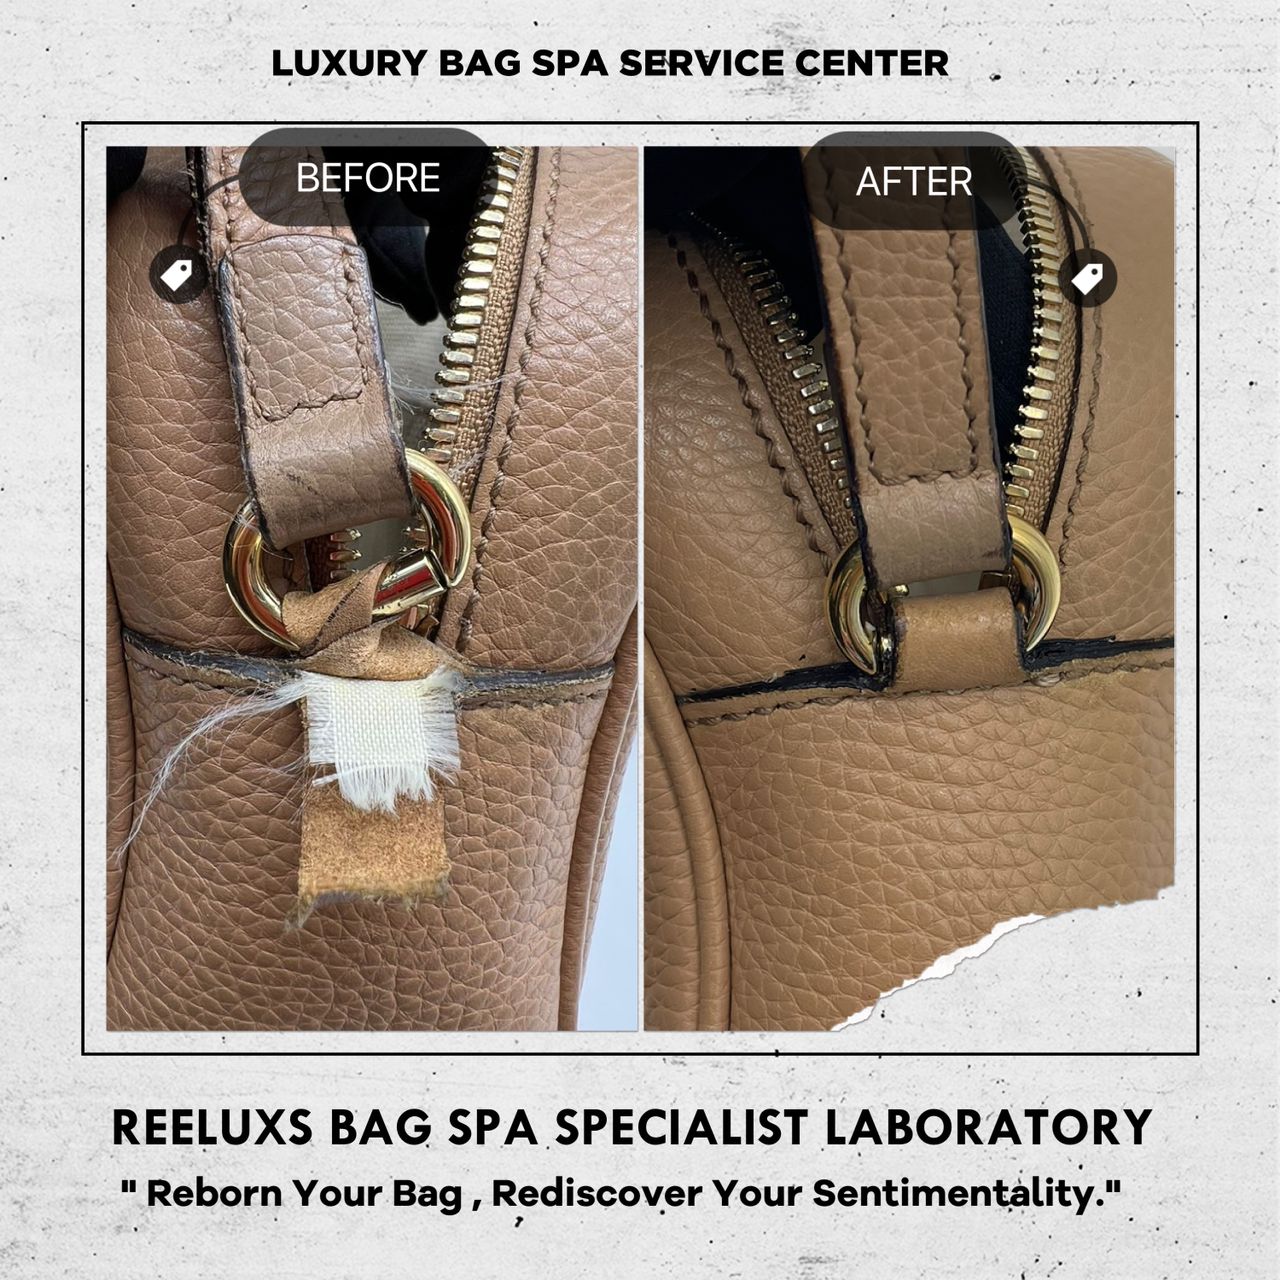 Befores & Afters - The Handbag Spa